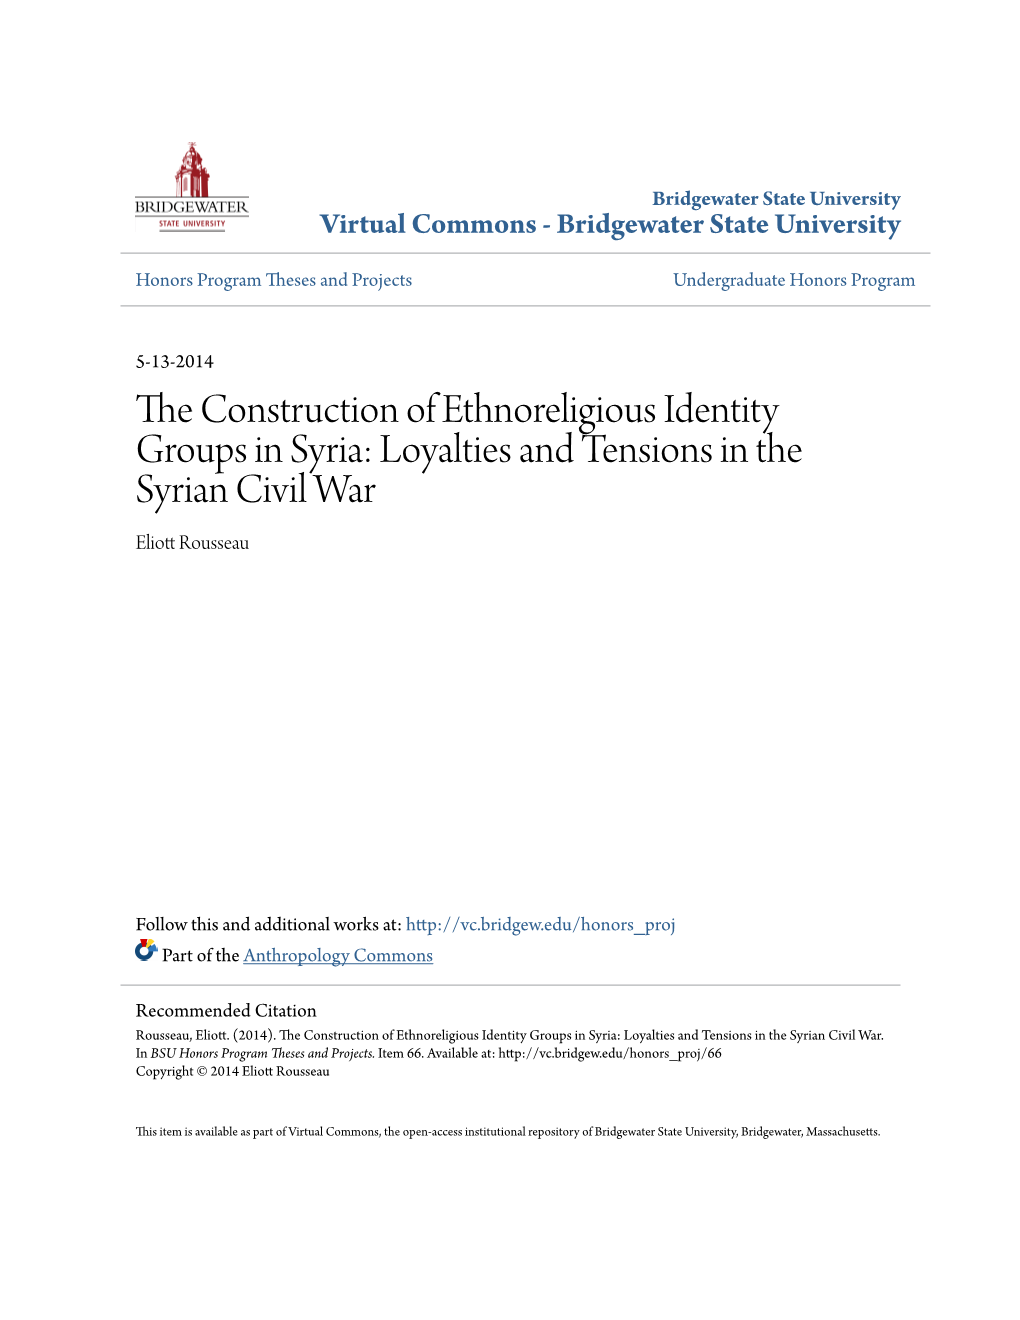 The Construction of Ethnoreligious Identity Groups in Syria: Loyalties